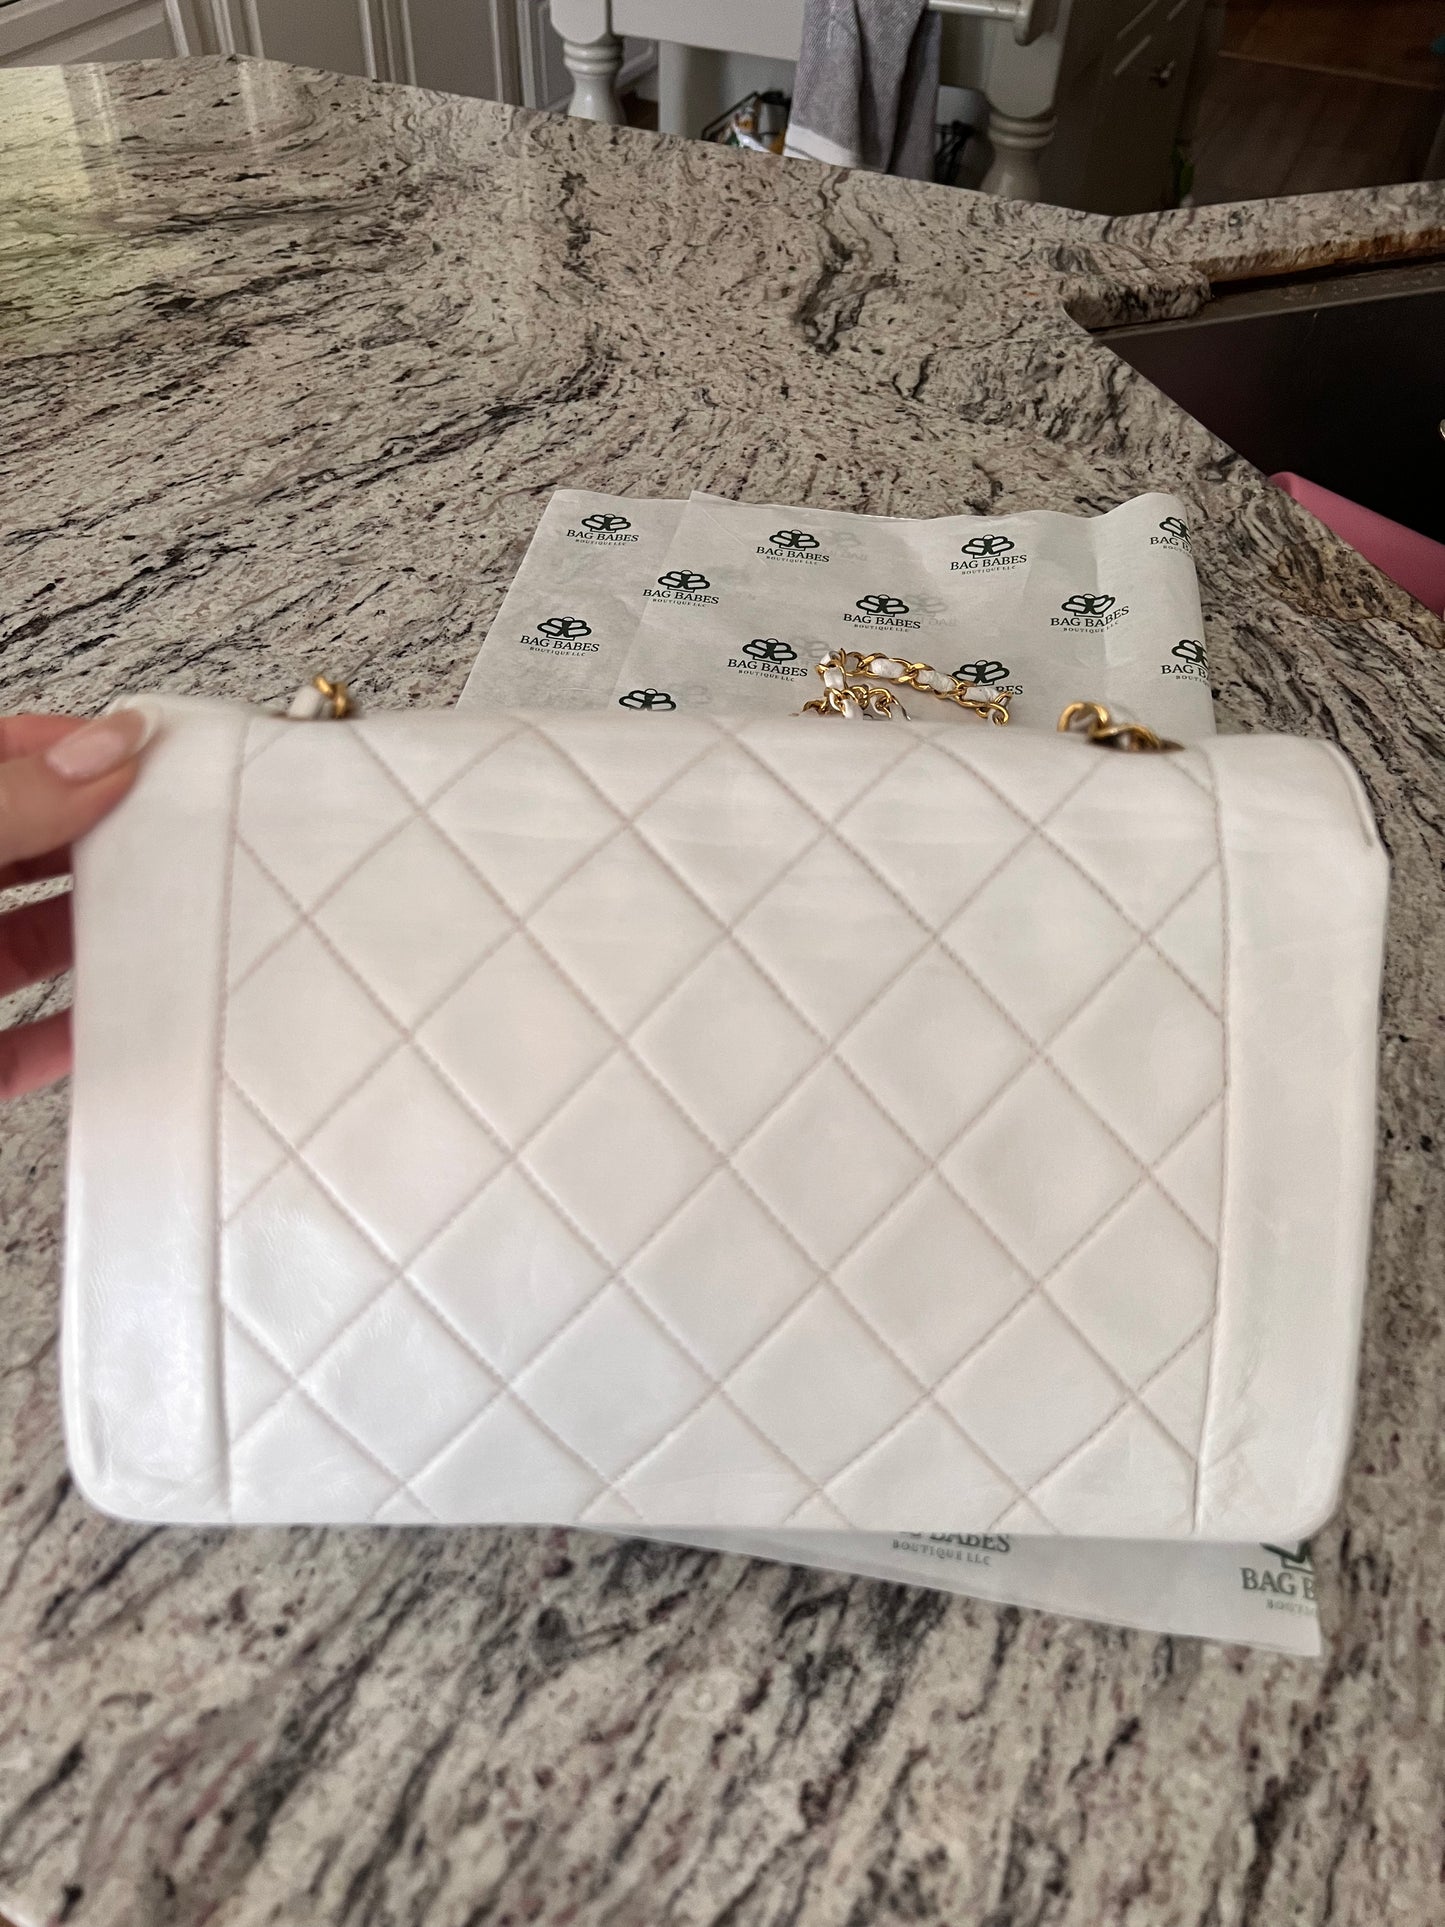 Chanel vintage white lambskin Diana 24k GHW - partial payment